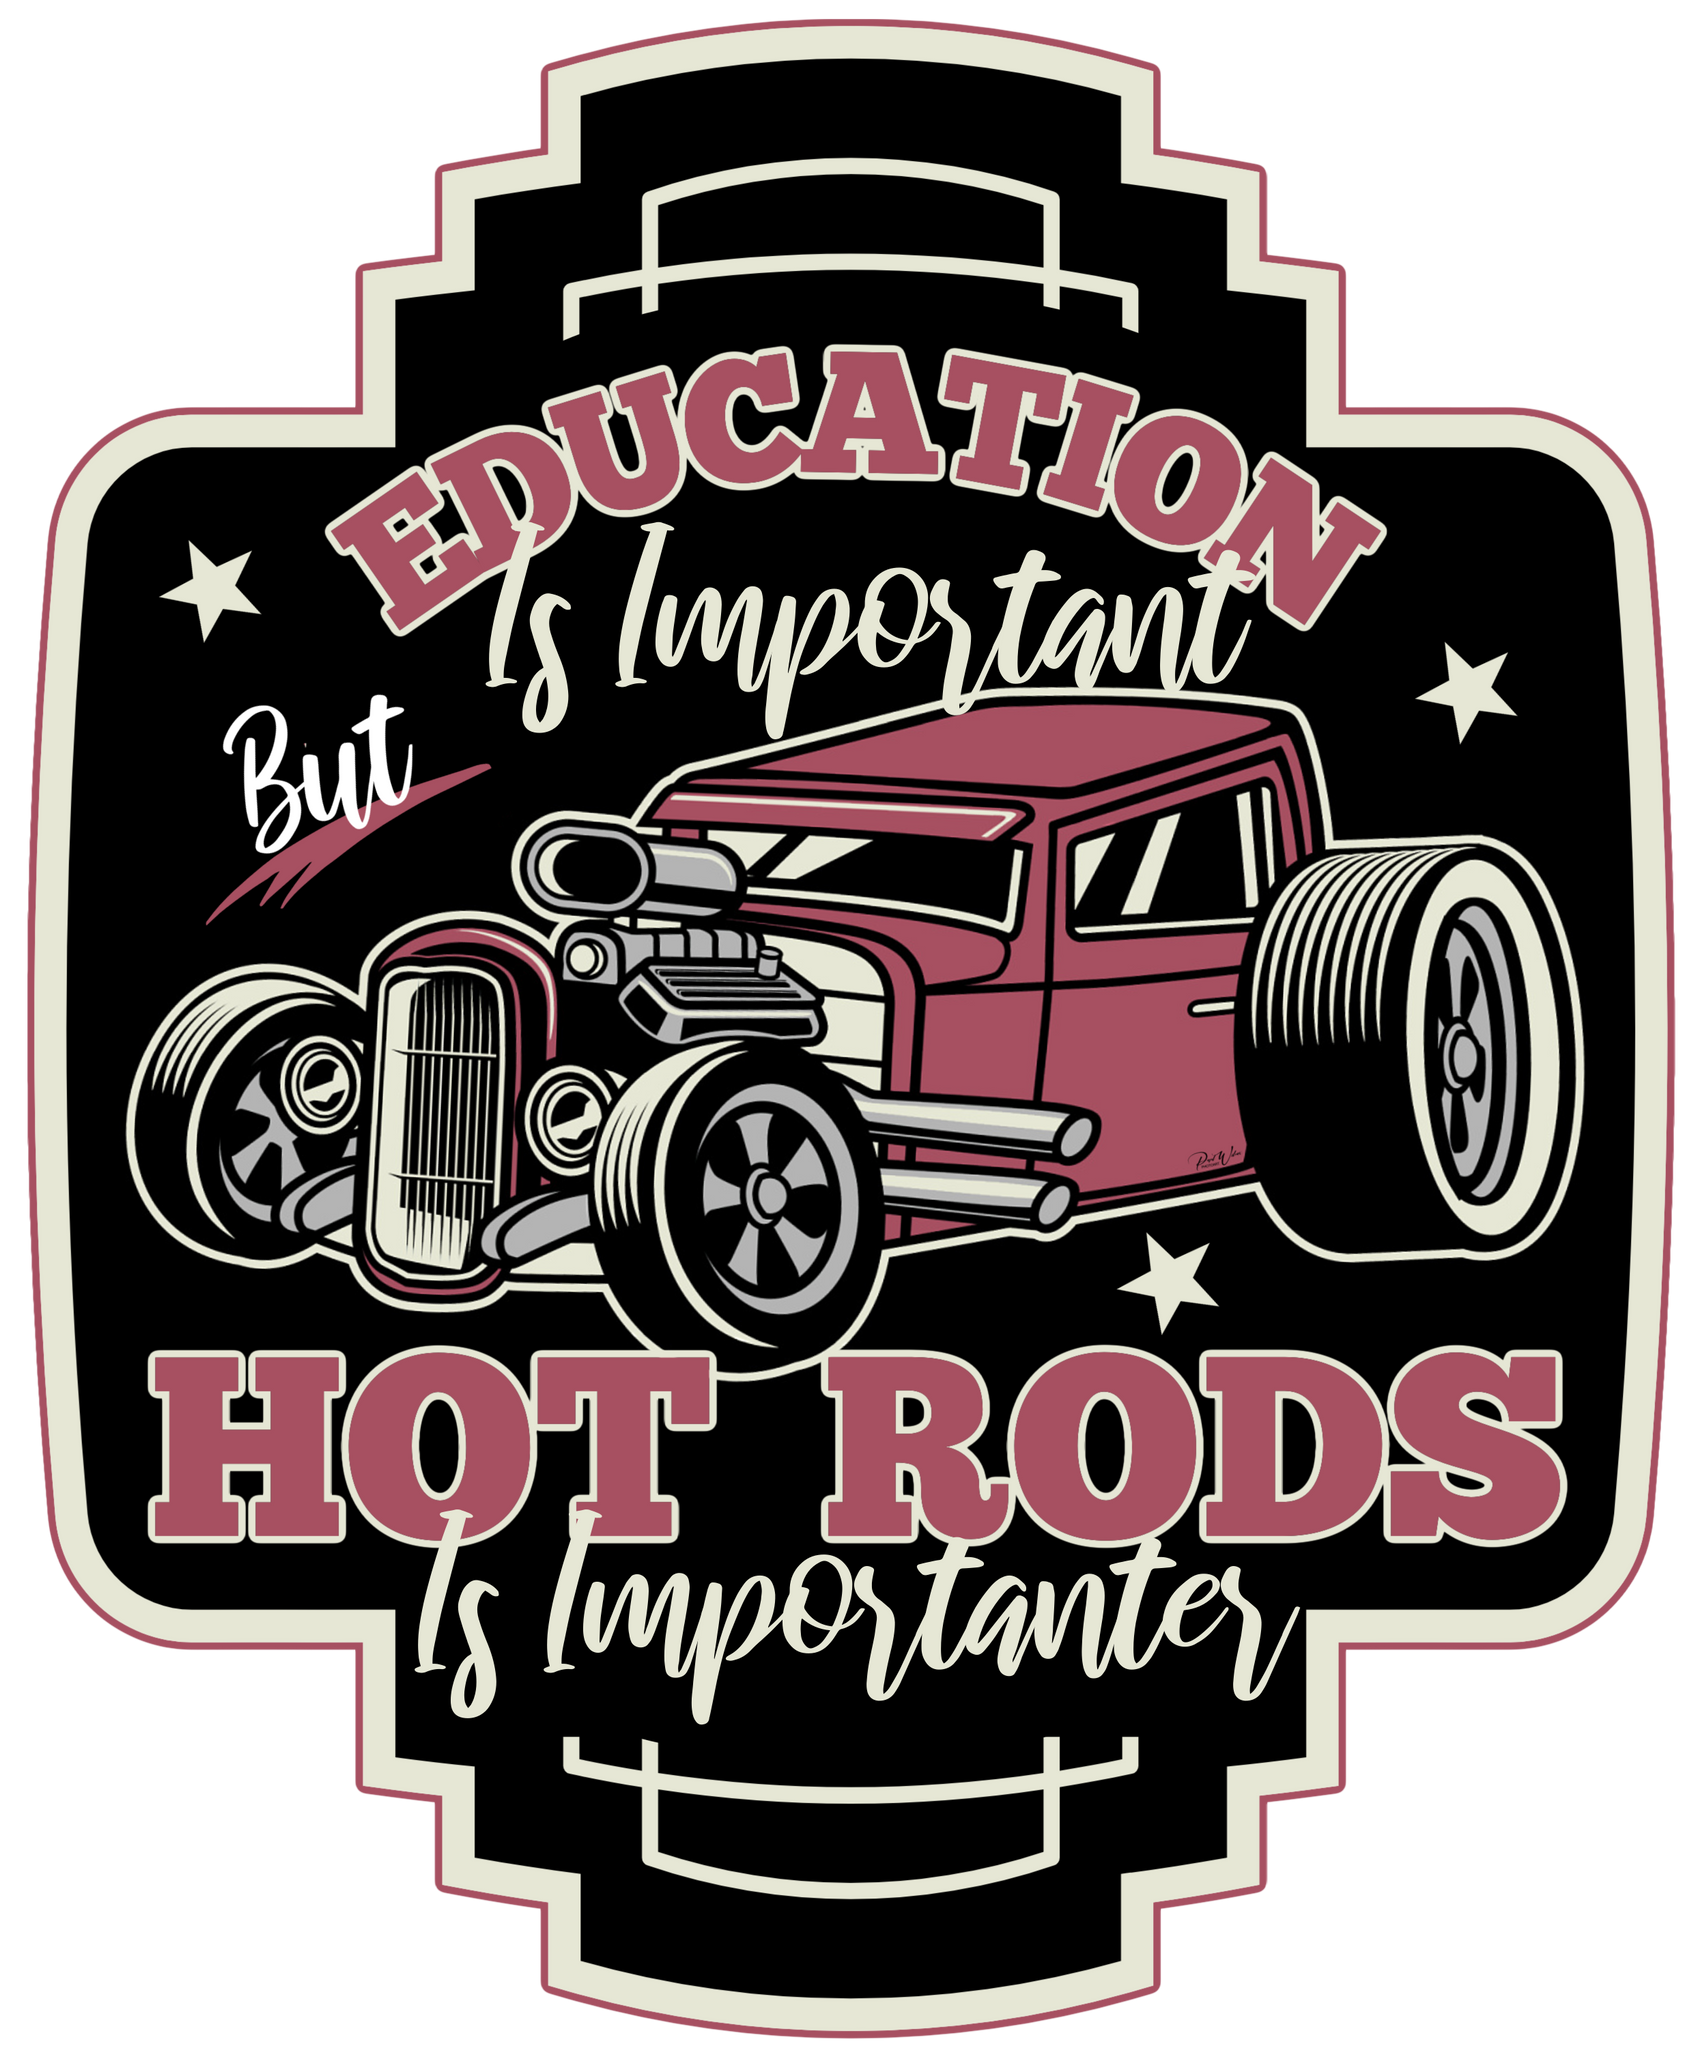 Education is Important but Hot Rods is Importanter - Image